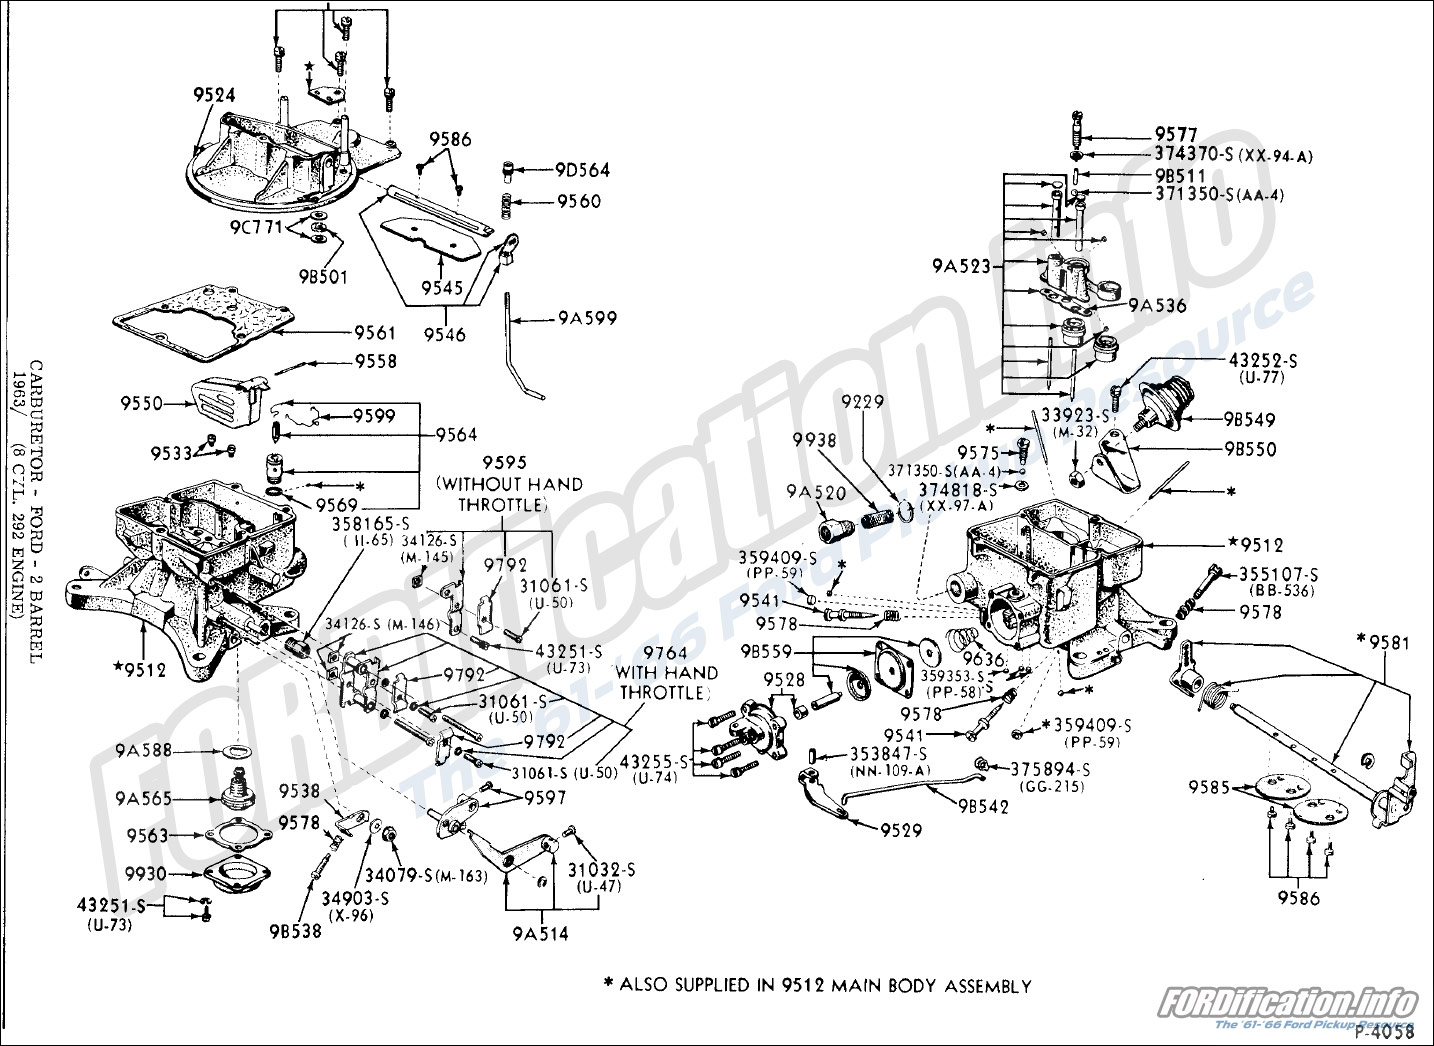 Engine-related Schematics - FORDification.info - The '61-'66 Ford